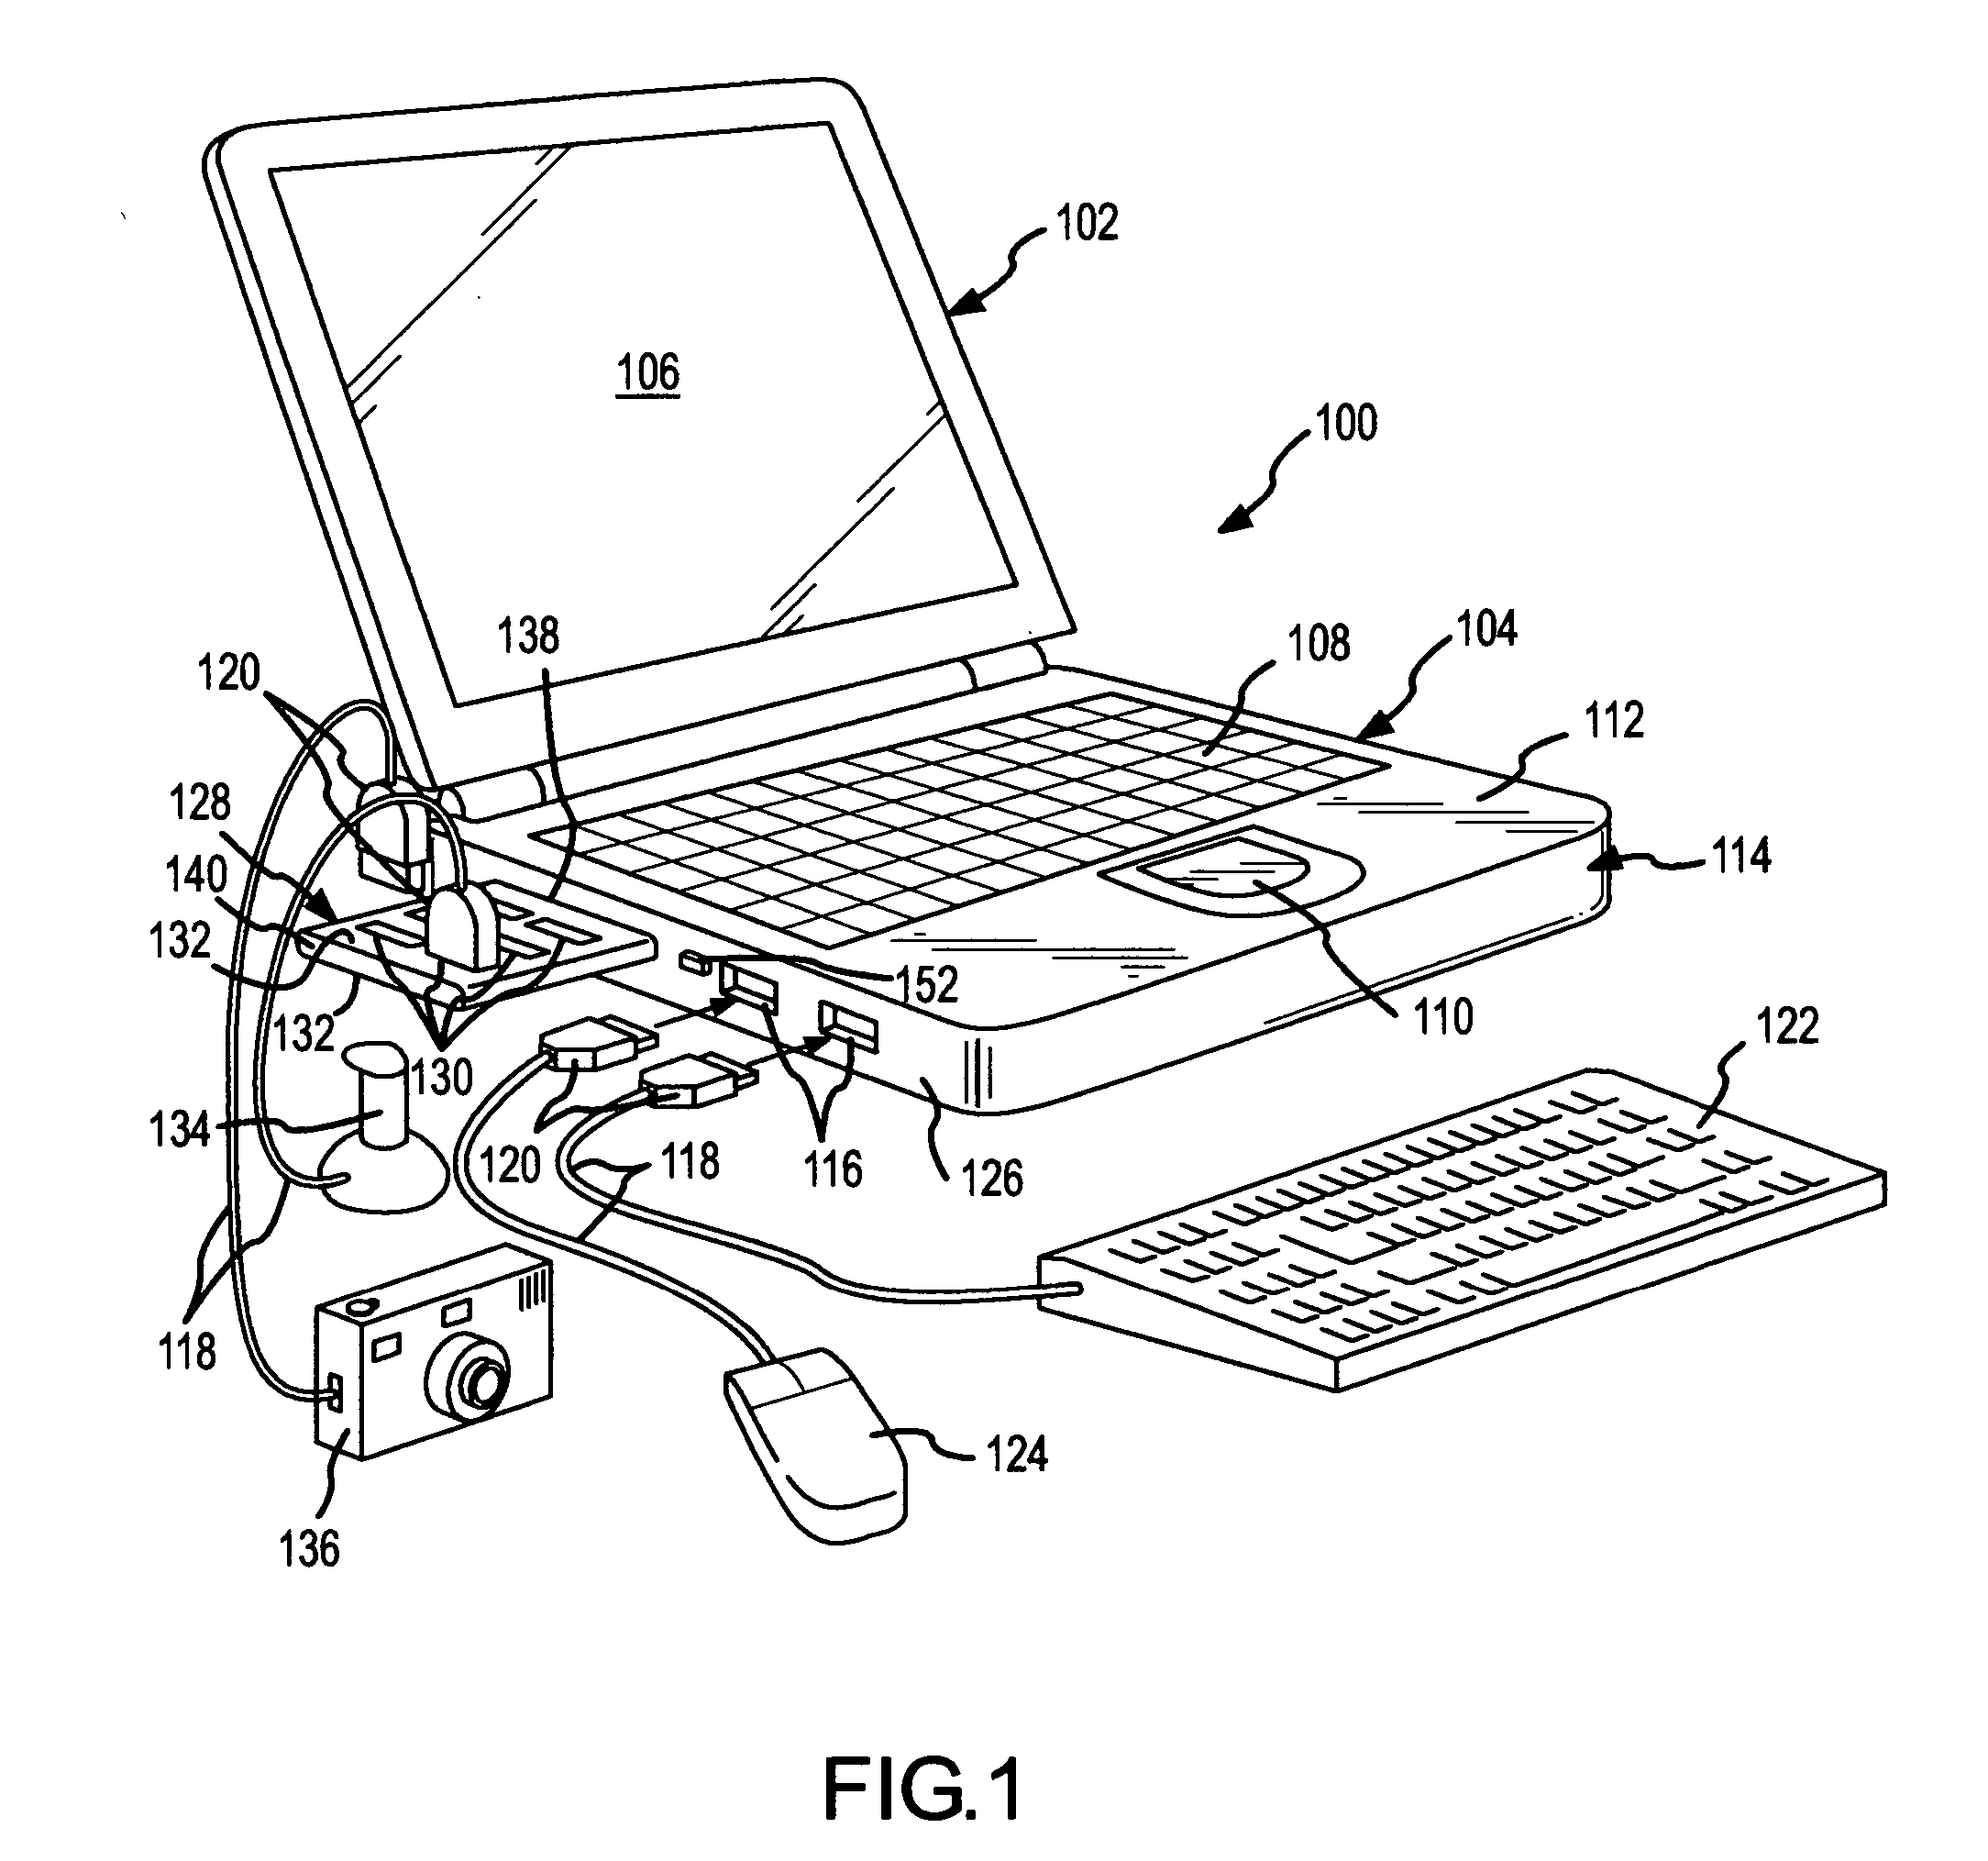 Computer system with multiple-connector apparatus